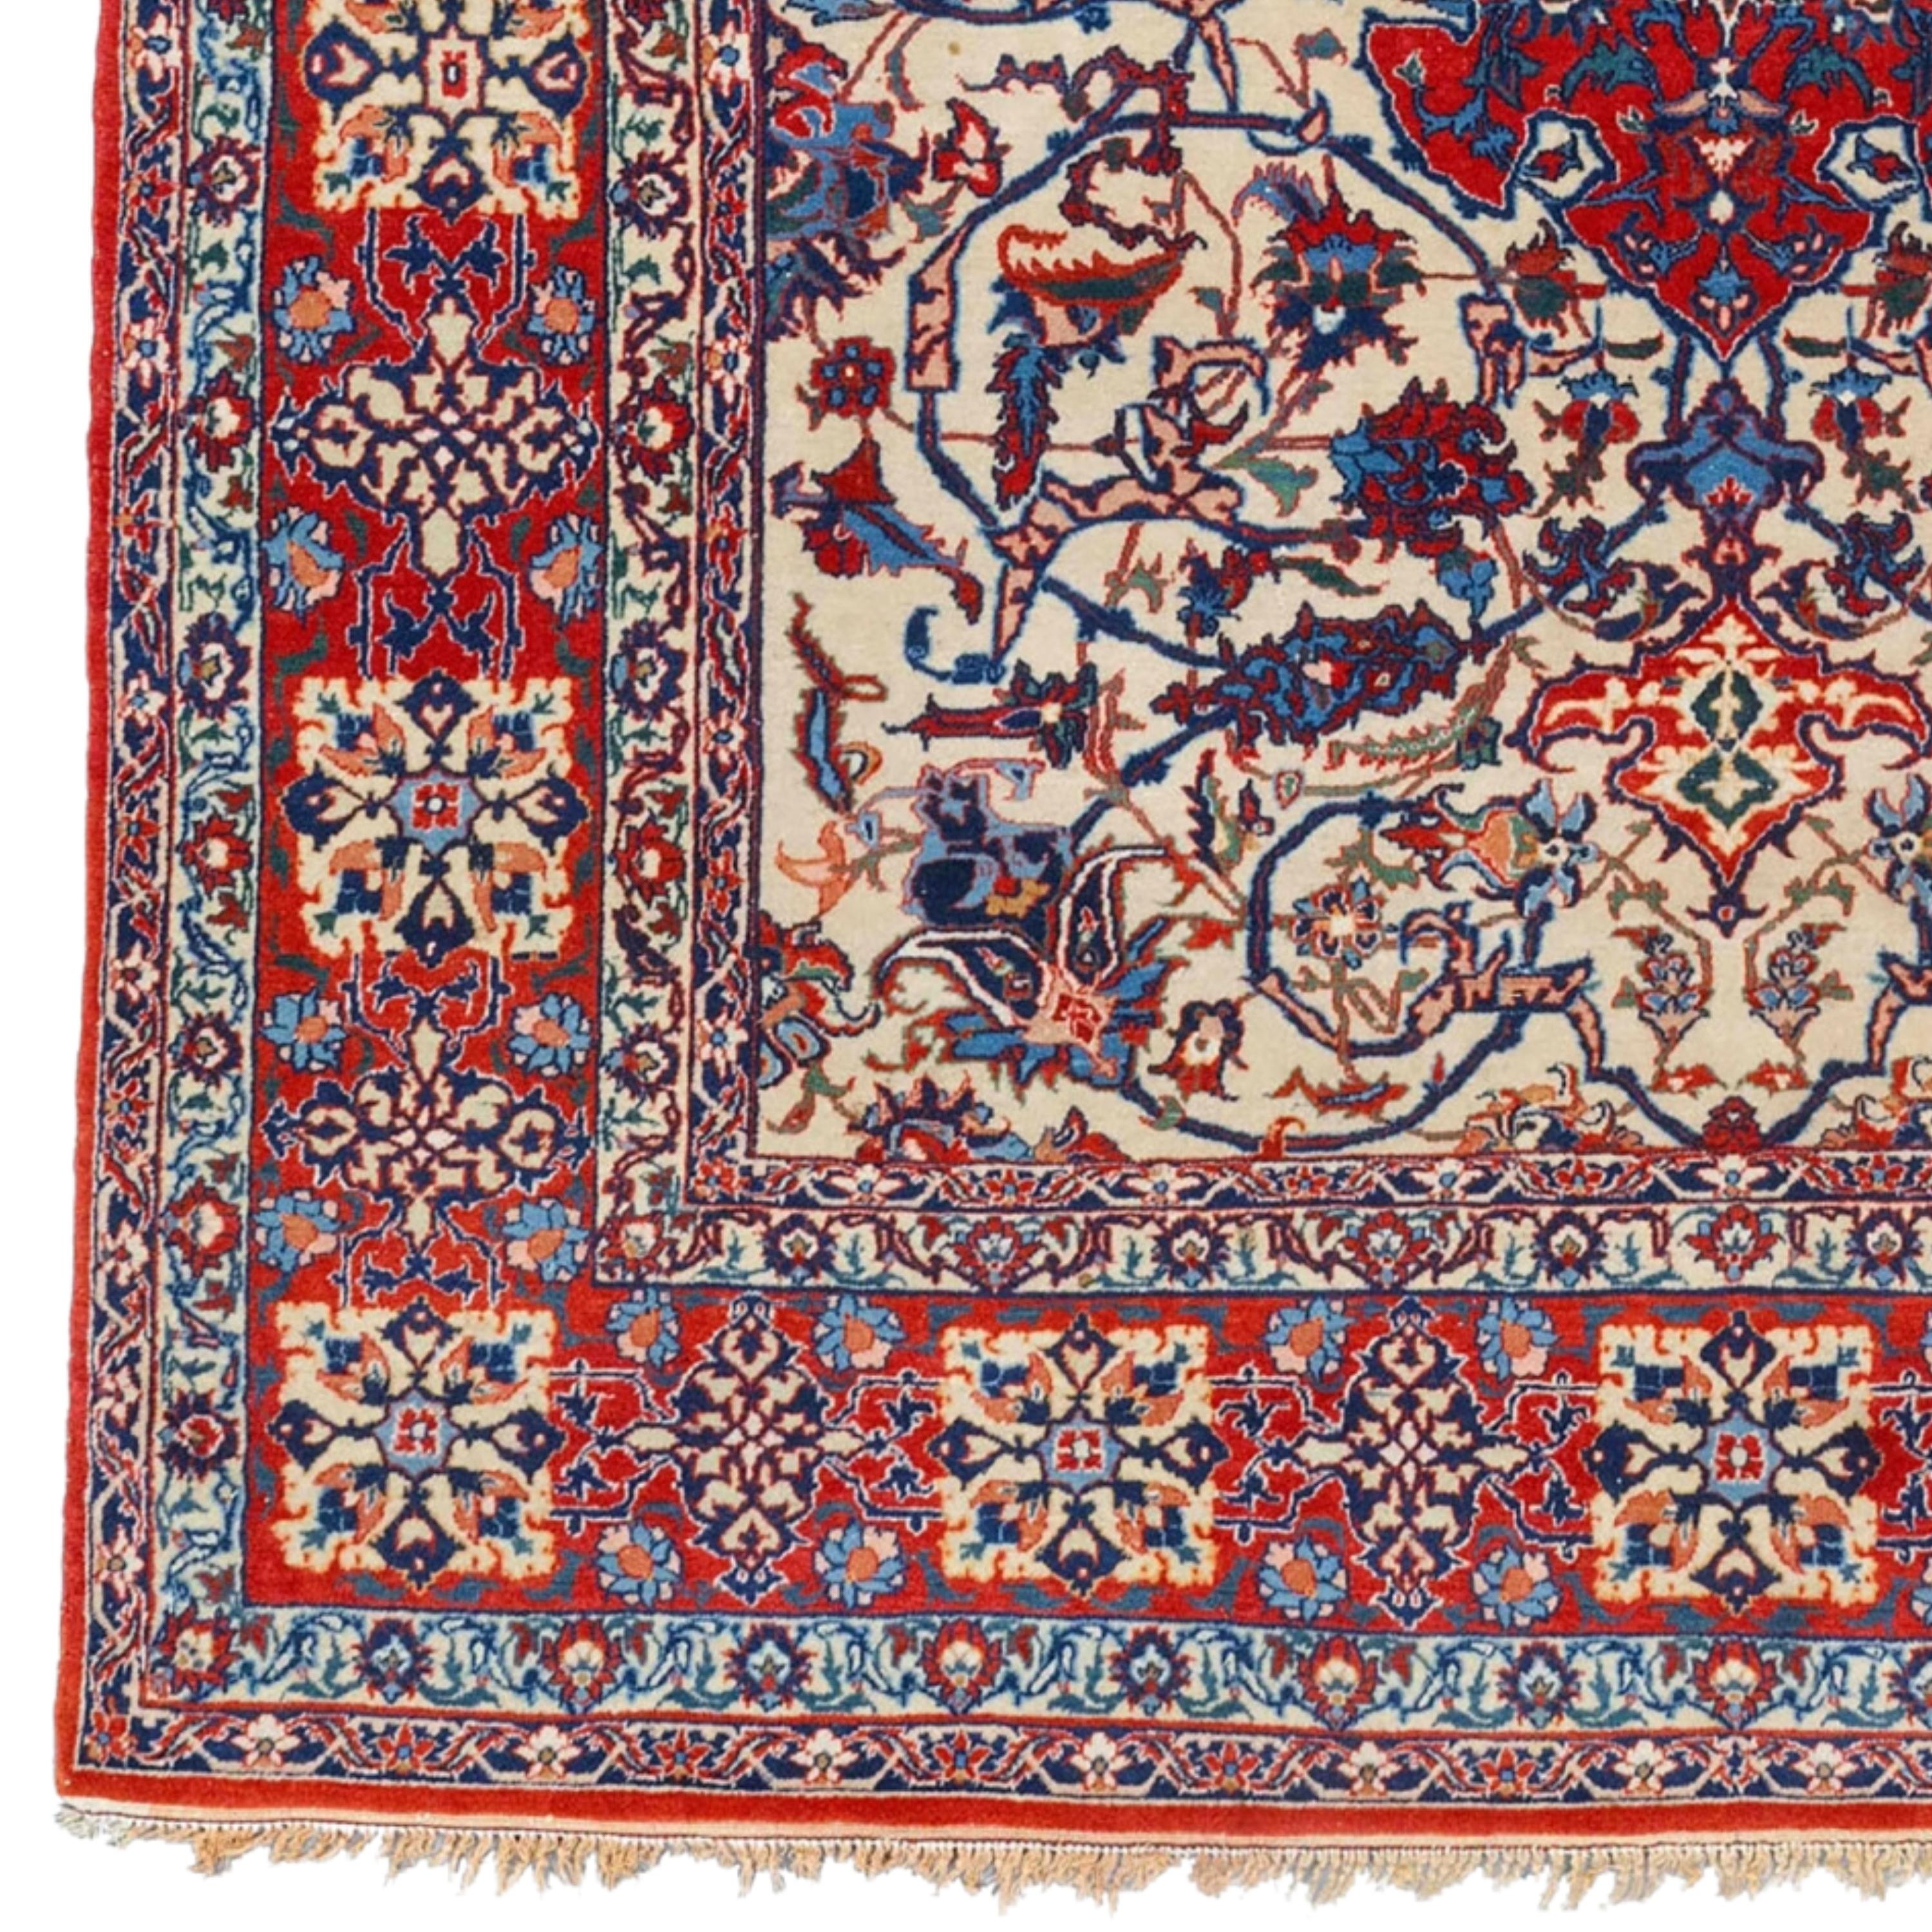 Late of 19th Century Prayer Esfahan Rug
Size: 146x212 cm

This impressive late 19th-century Esfahan Carpet is a masterpiece reflecting the elegant and sophisticated craftsmanship of a historic period.

Rich Patterns: The carpet is decorated with